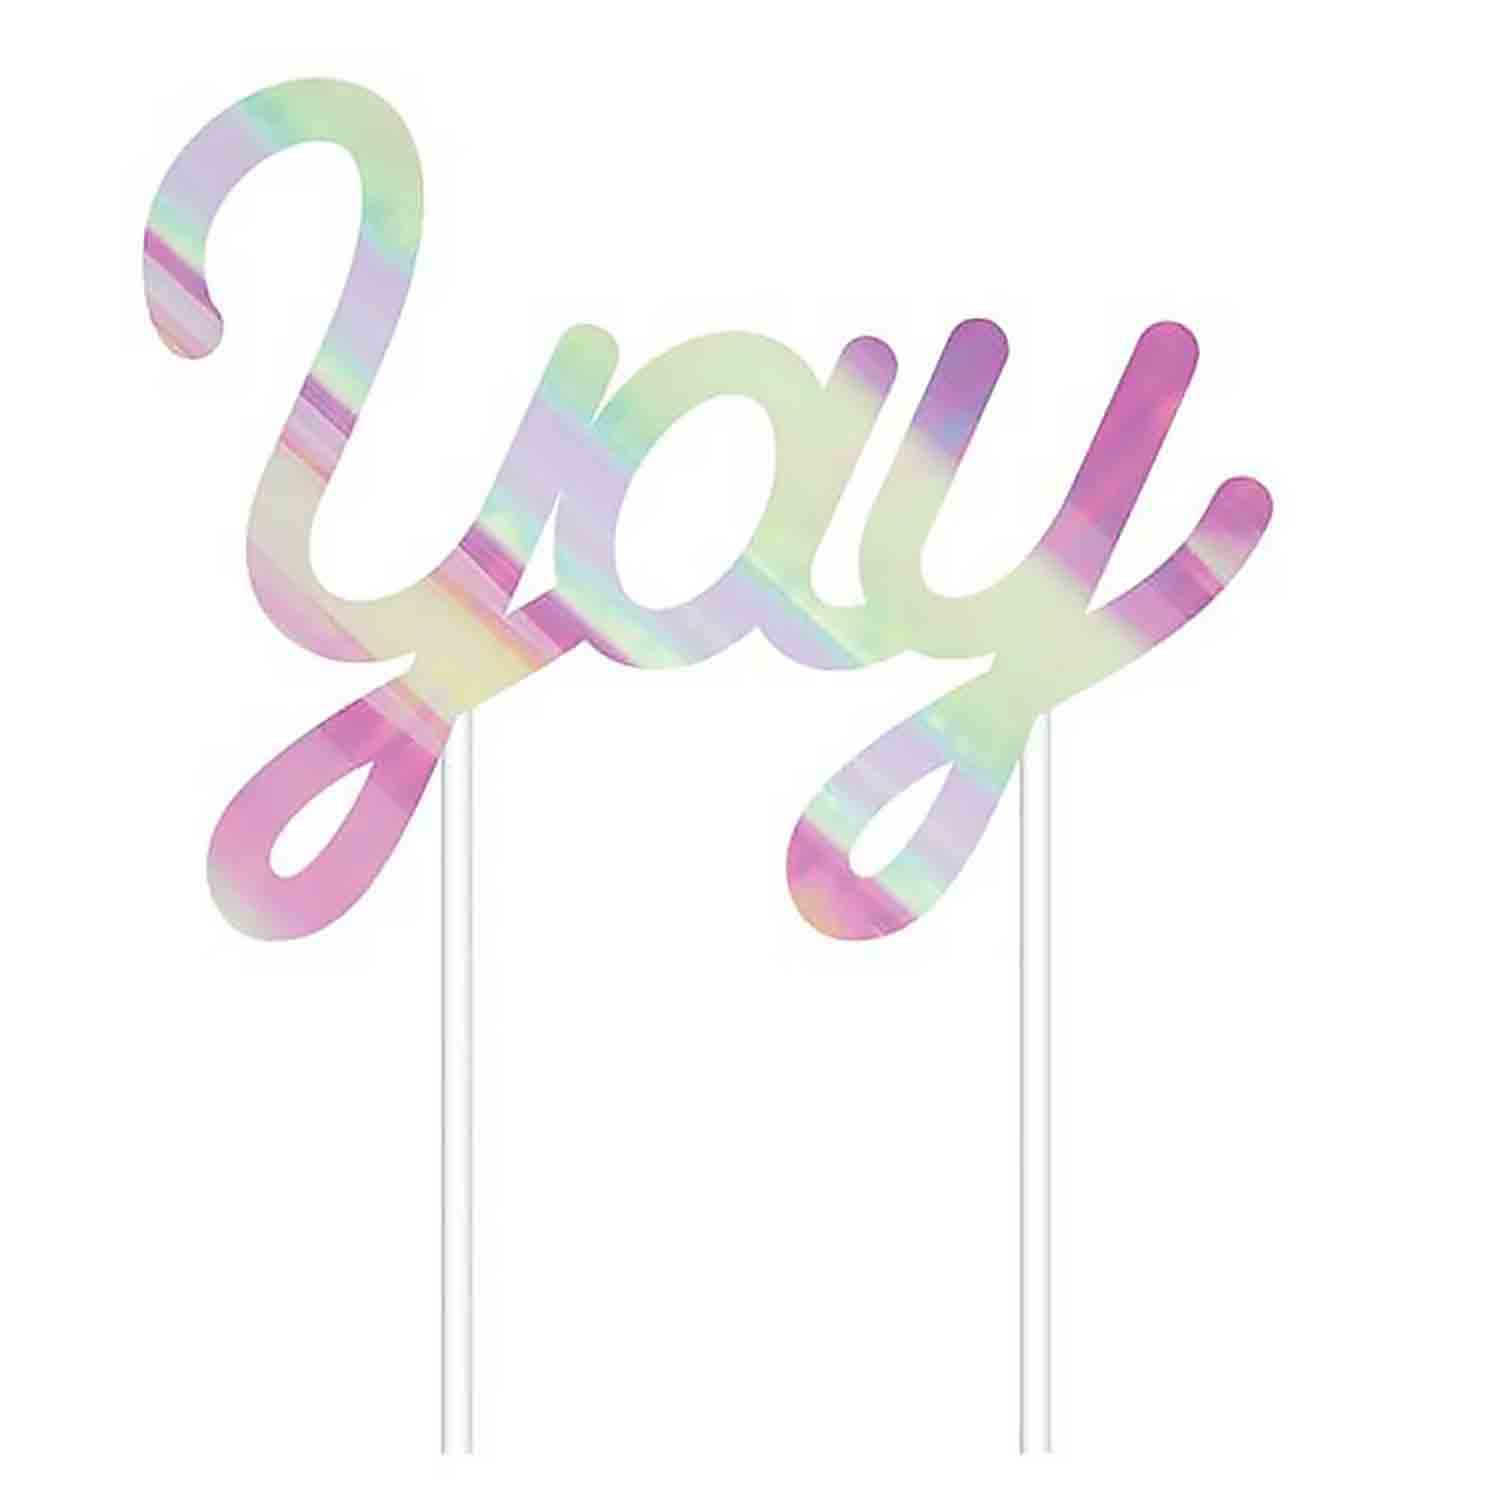 Iridescent Yay Cake Topper